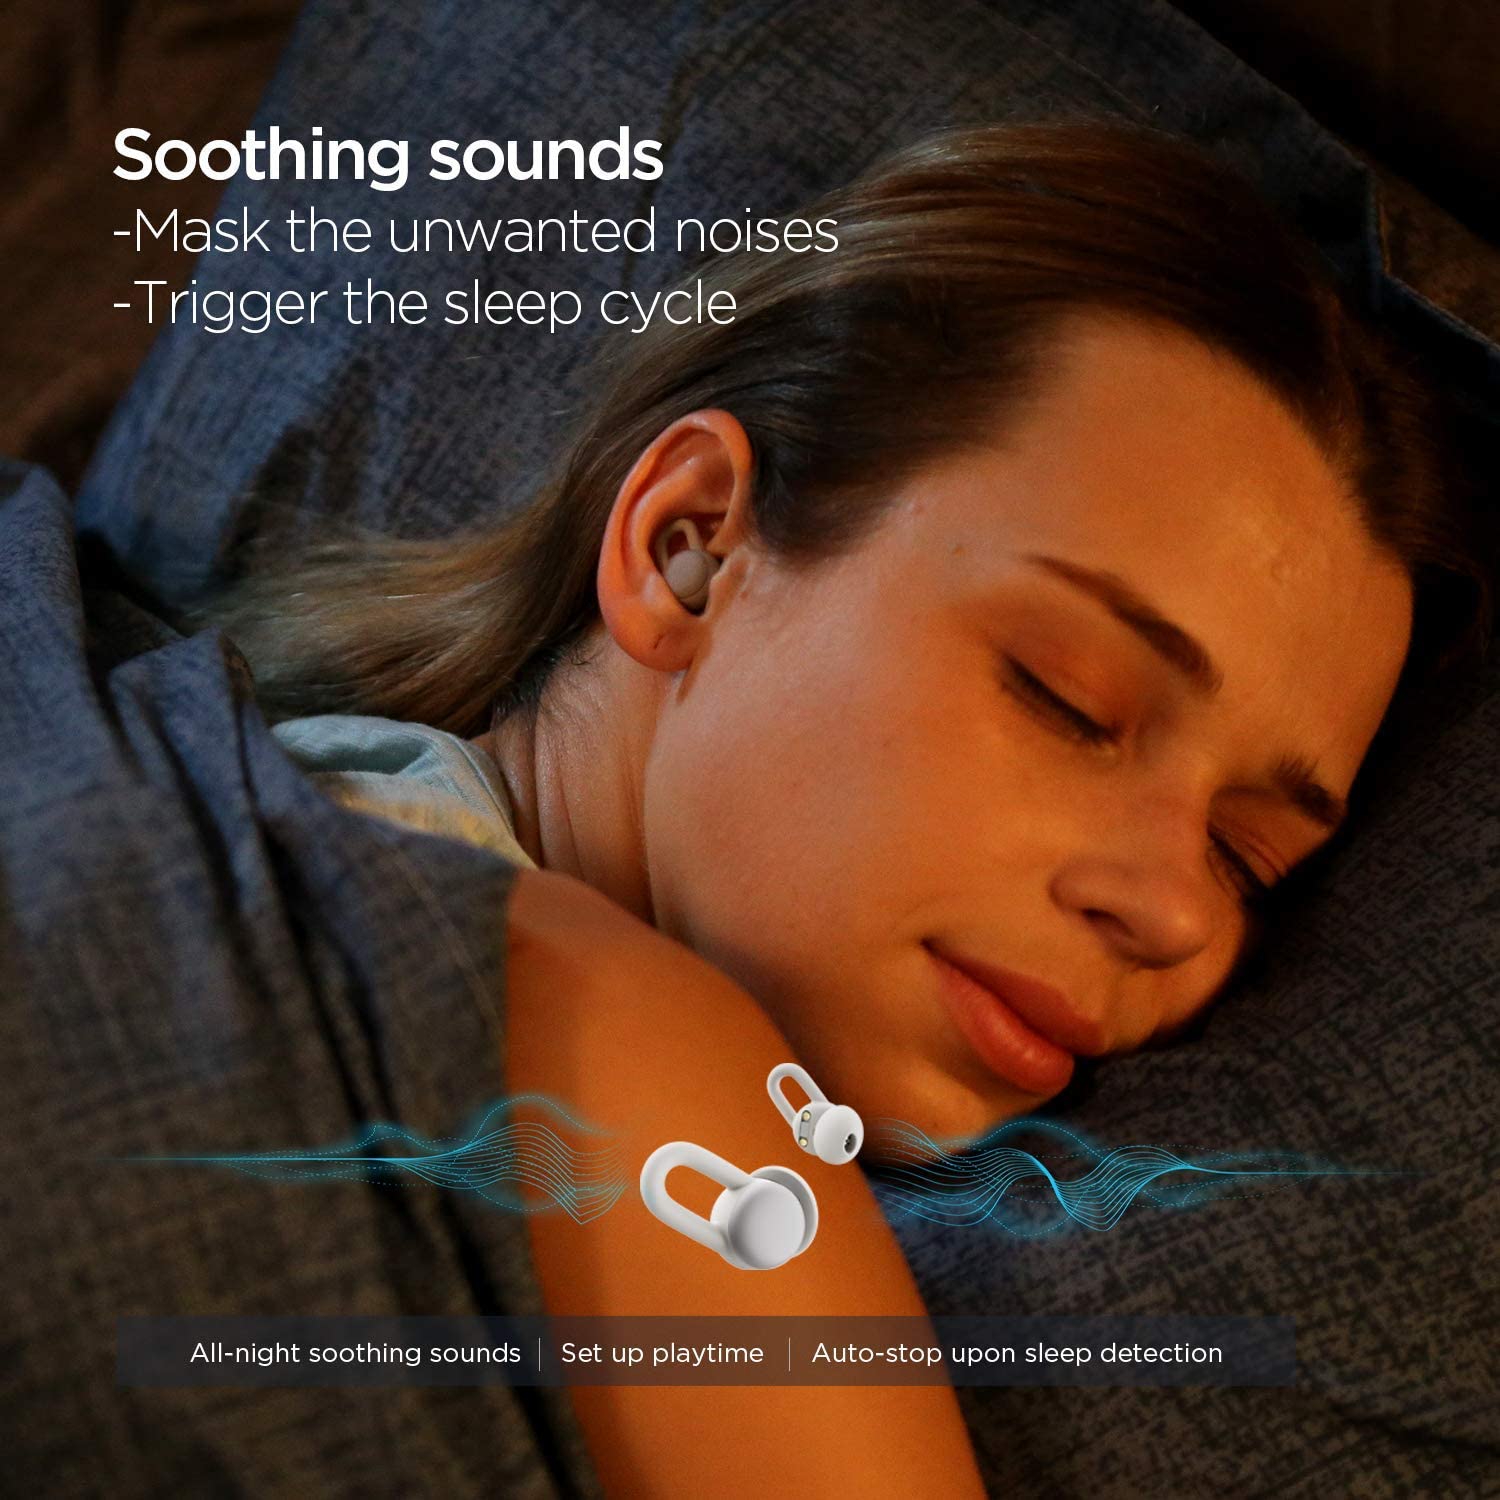 Amazfit Zenbuds Smart Sleep Earbuds, Noise Blocking in-Ear Design, Sleep Monitoring, Soothing Sounds $129.99 + FS